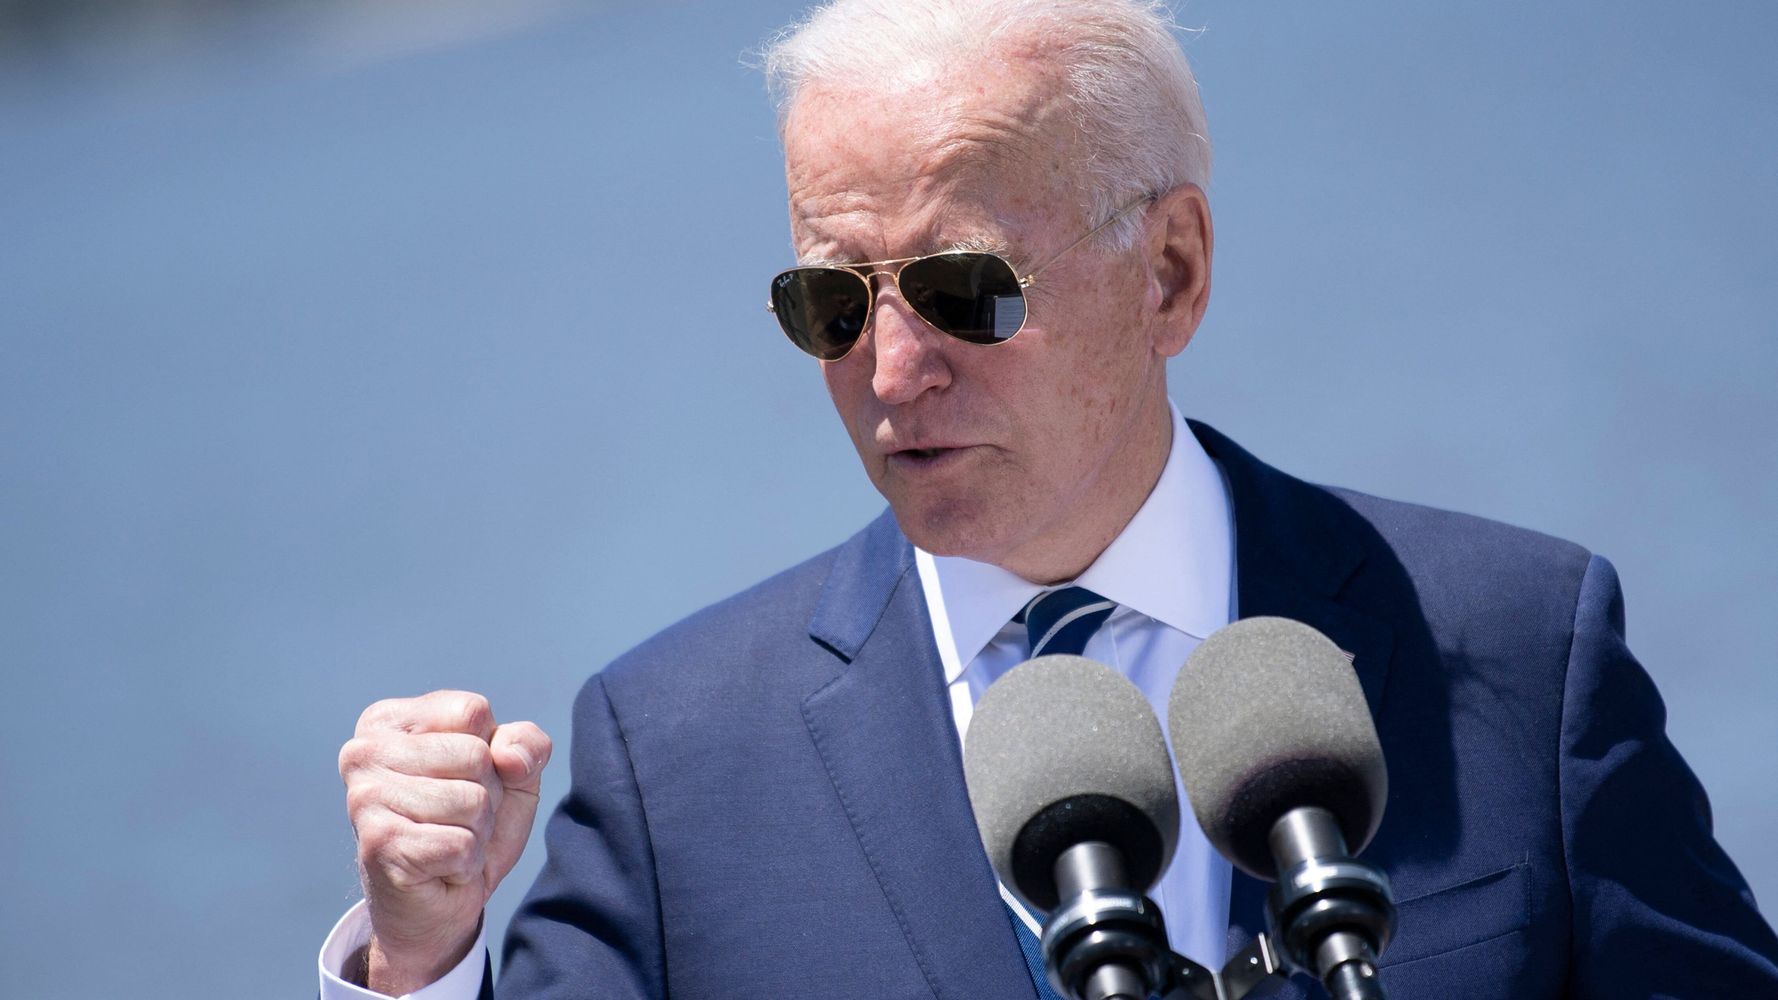 Joe Biden Says Weak Jobs Report 'Makes Clear' Need For More Stimulus